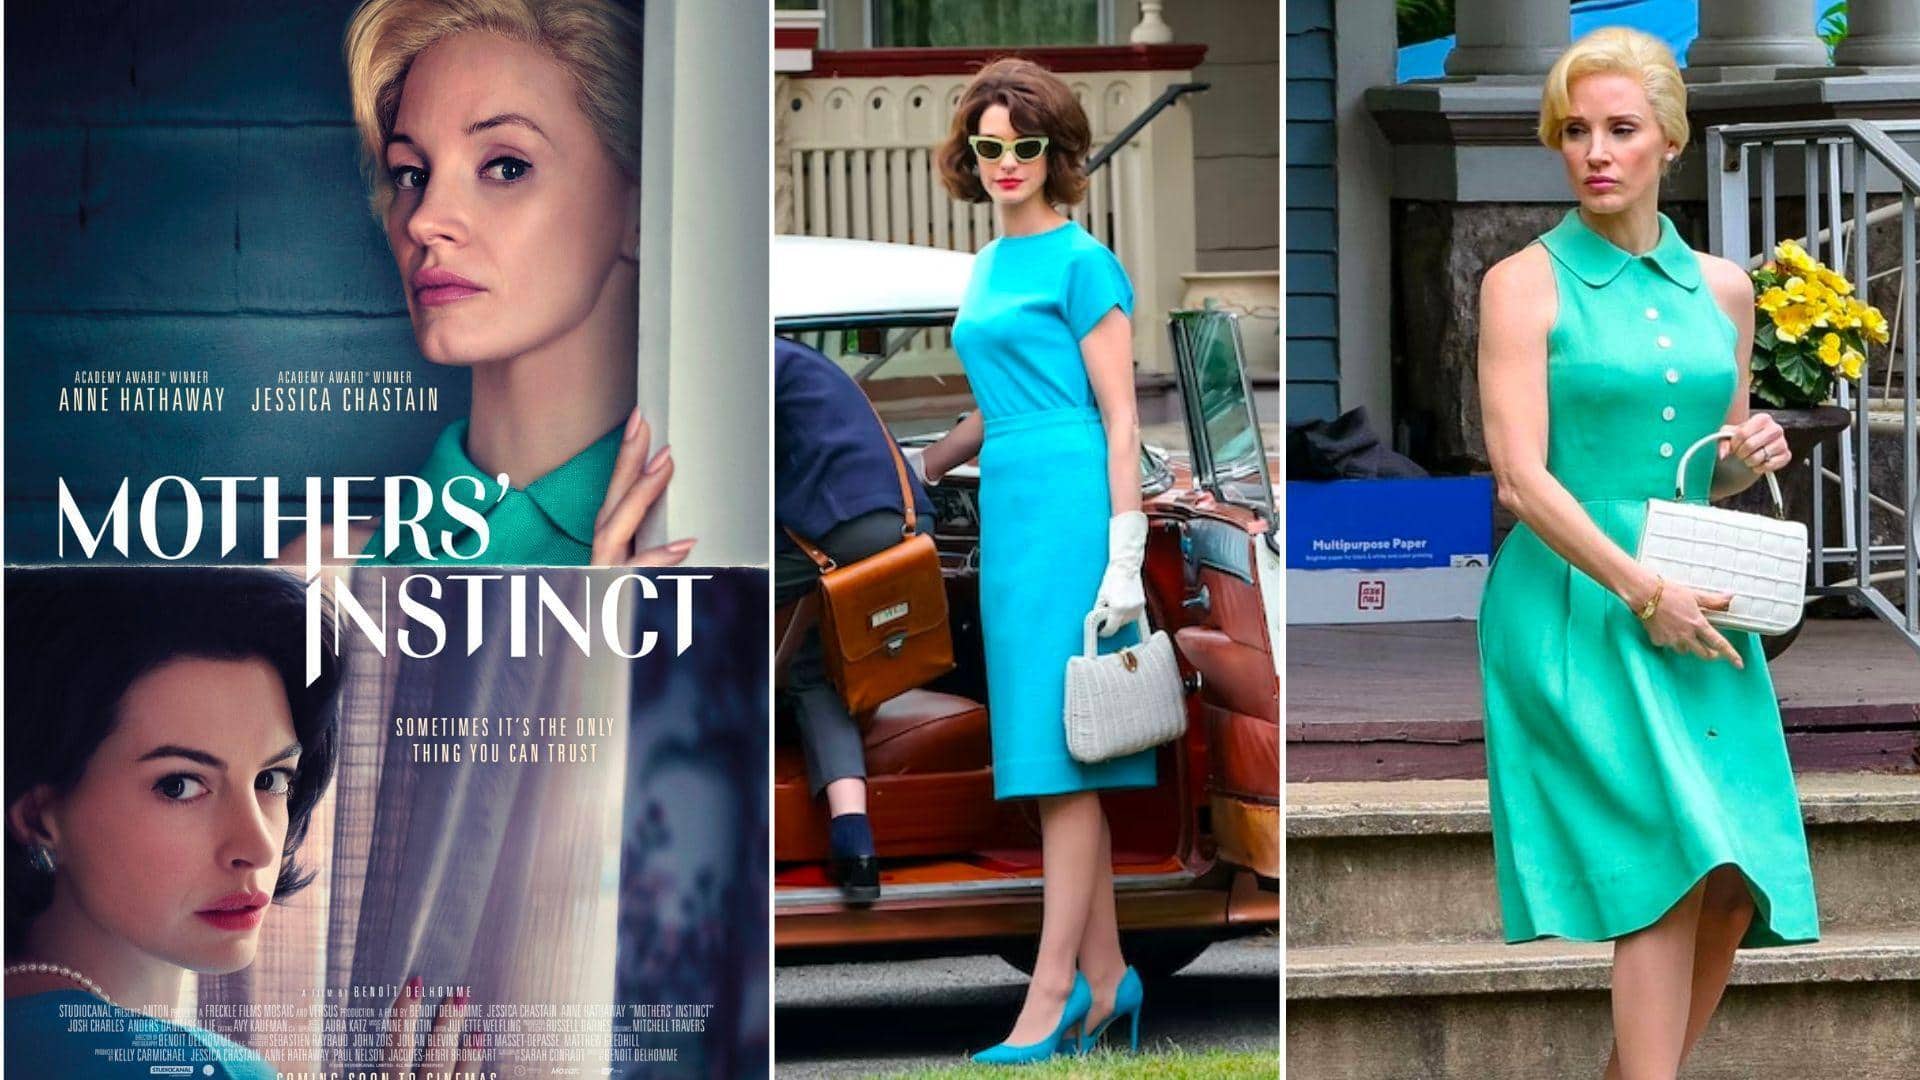 Anne Hathaway's 'Mothers' Instinct' Cast, summary, release date—a